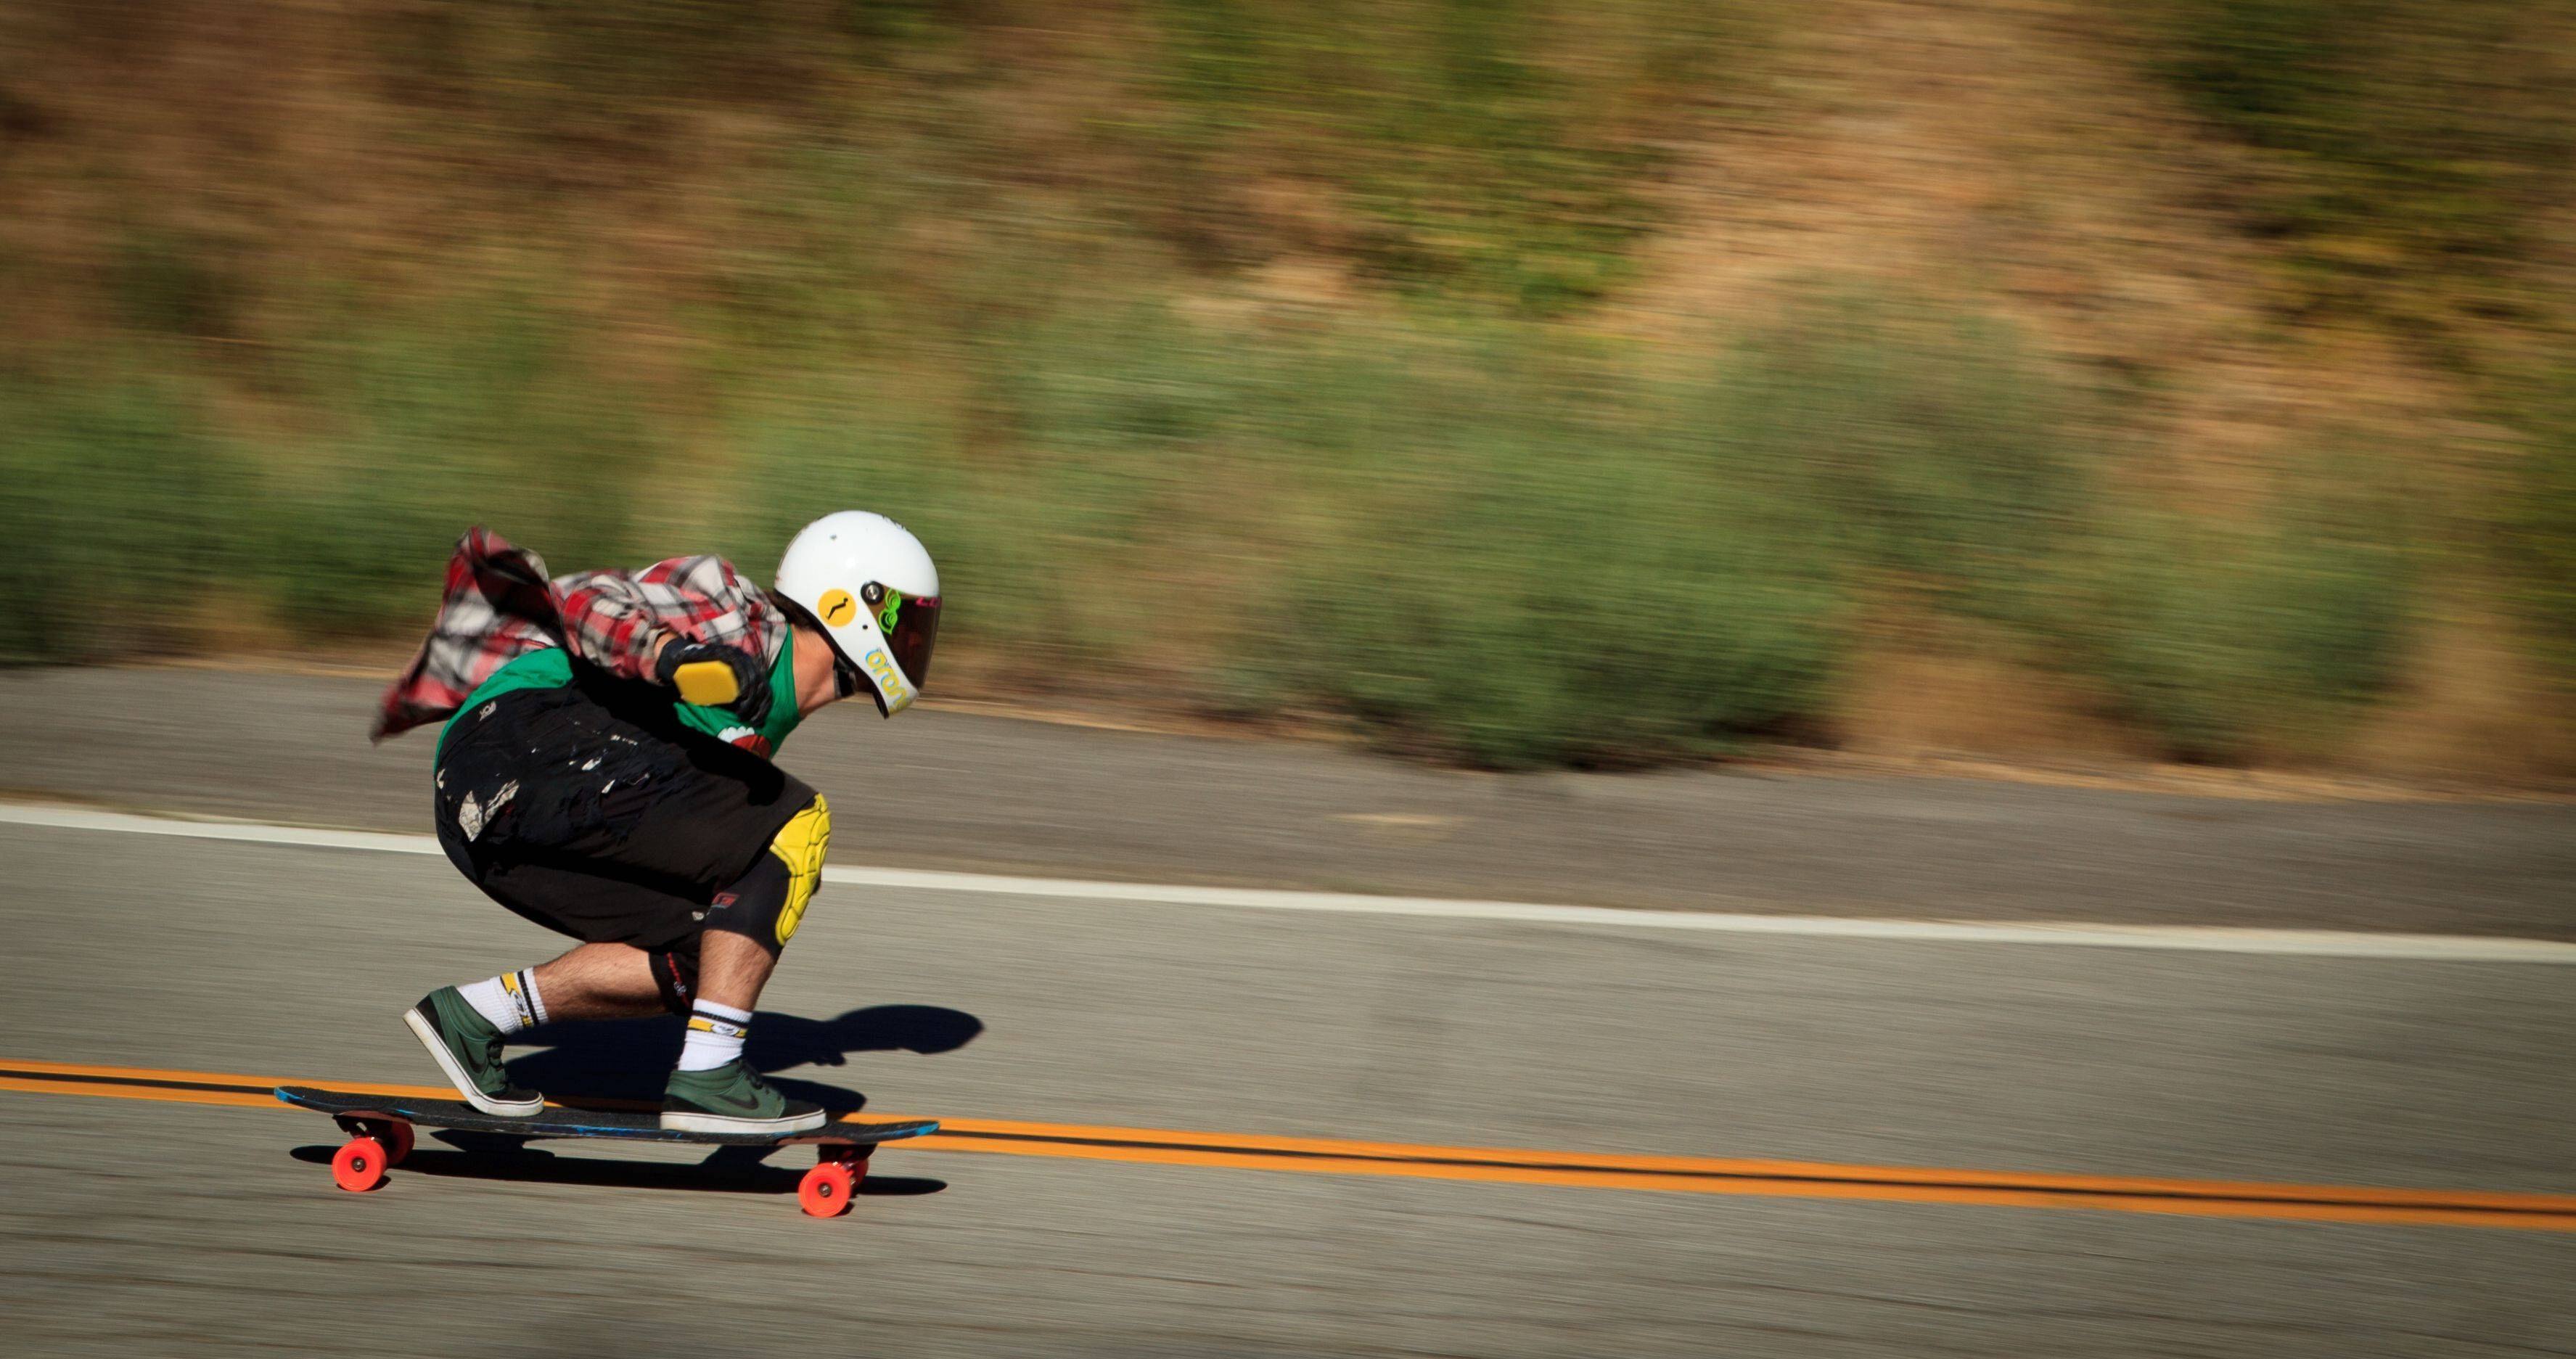 Longboarding: Downhill style of riding a board, Riding down hills as fast as possible. 3550x1880 HD Wallpaper.